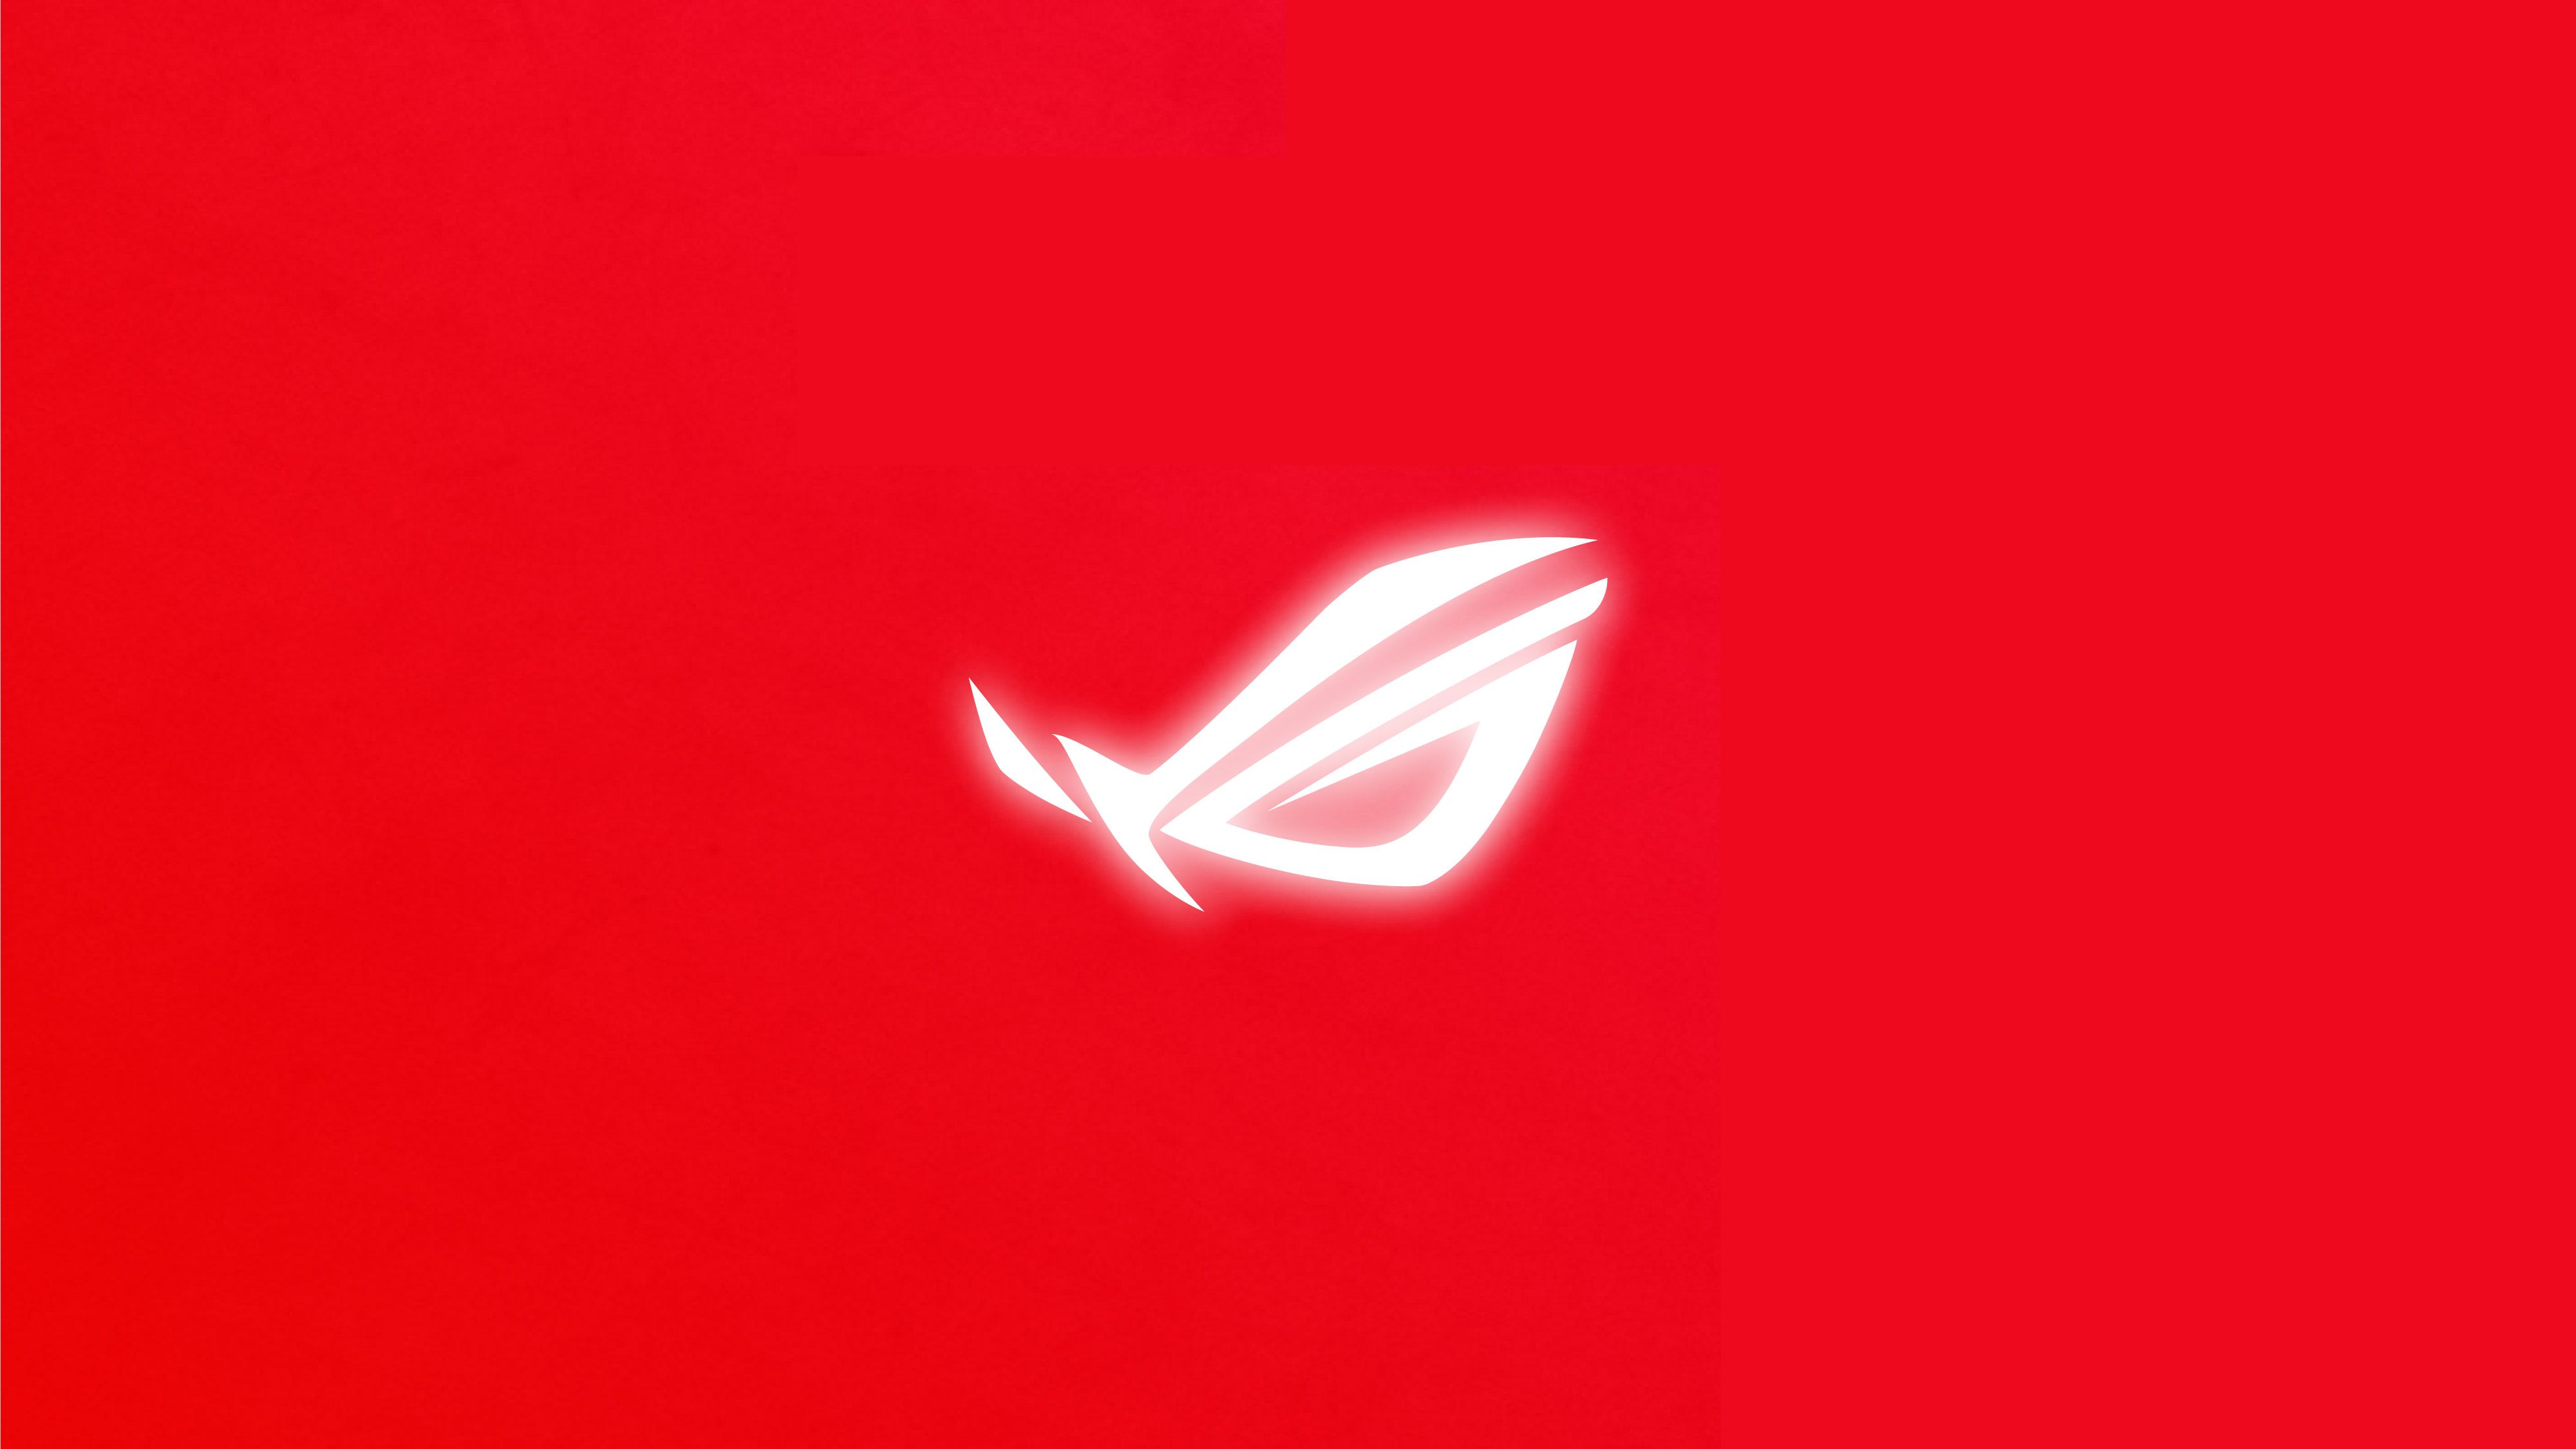 General 4001x2250 ASUS Republic of Gamers red background logo simple background minimalism brand